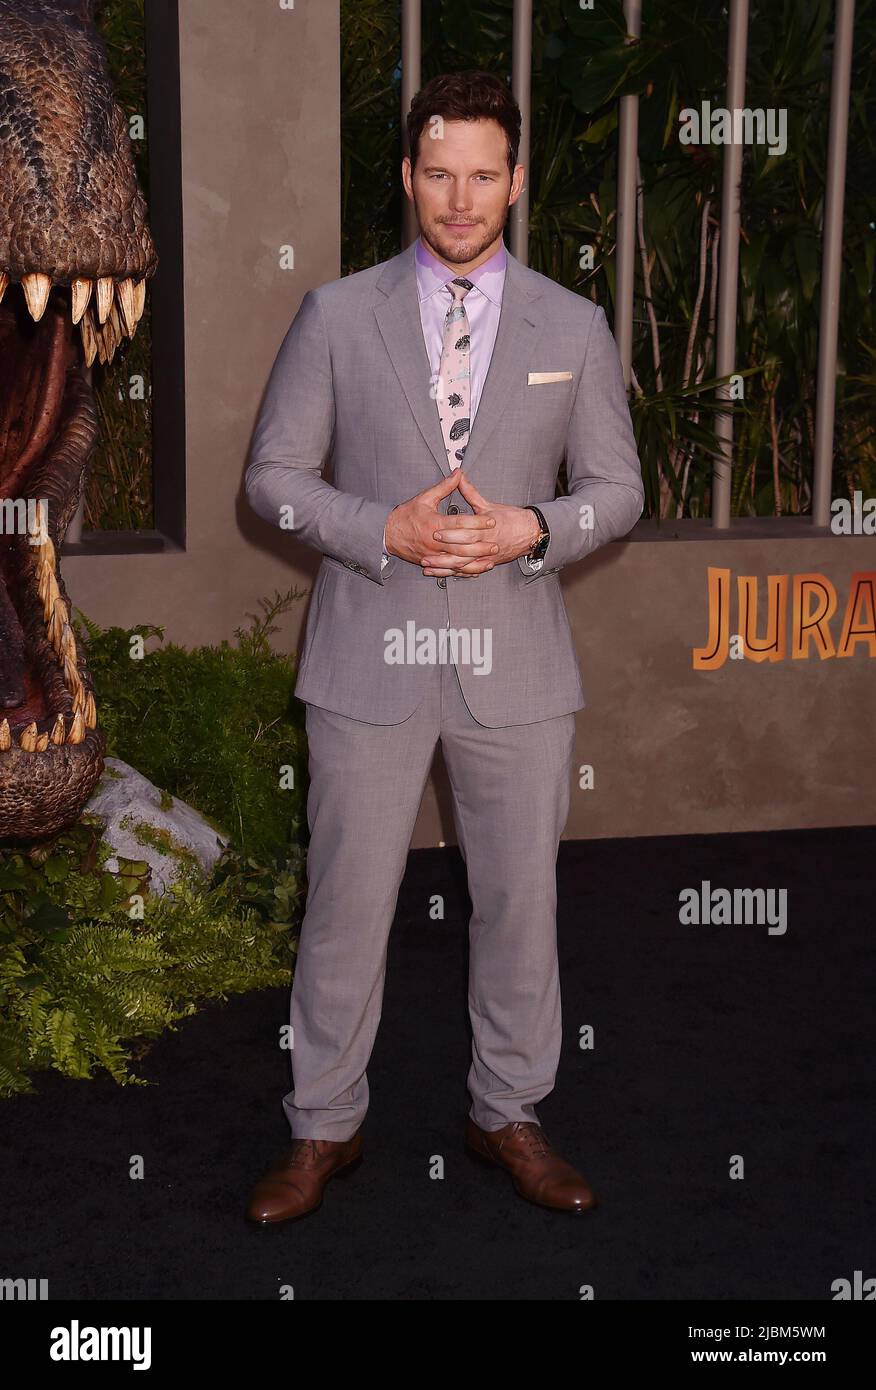 HOLLYWOOD, CA - JUNE 06: Chris Pratt attends the Los Angeles premiere of Universal Pictures' 'Jurassic World Dominion' at the TCL Chinese Theatre on J Stock Photo